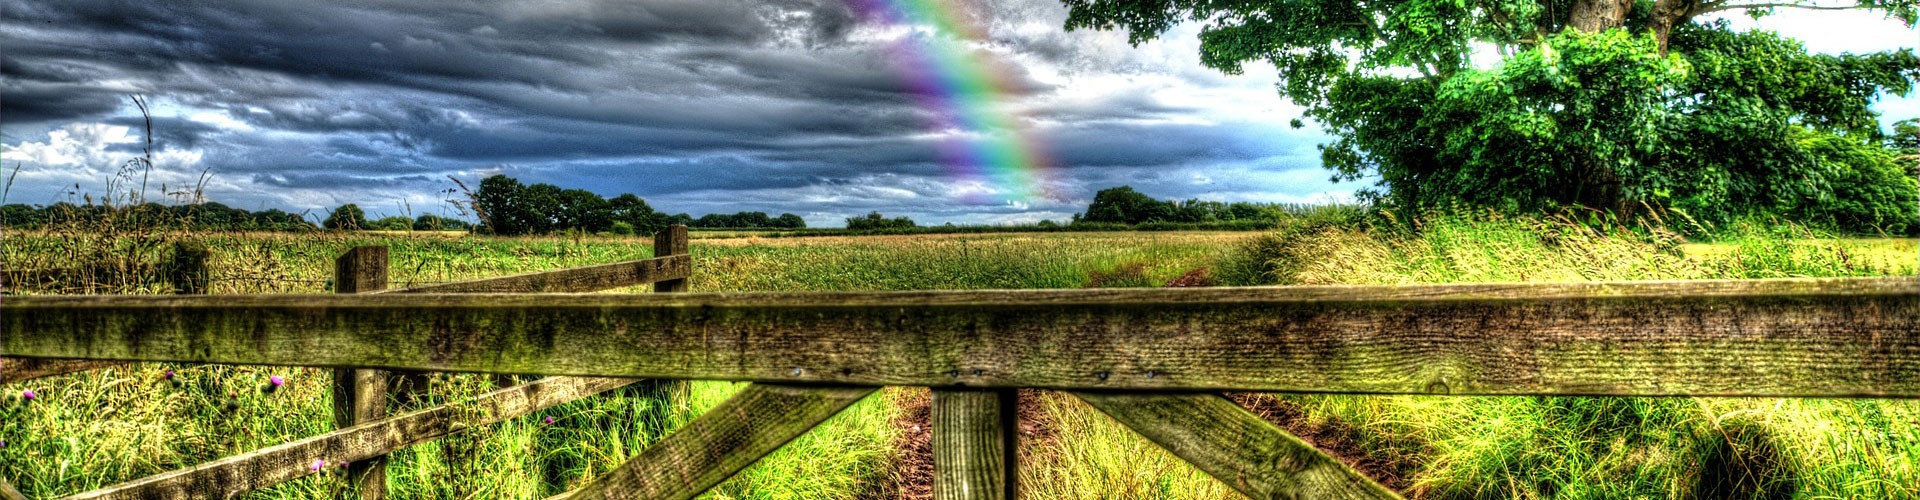 rainbow over gate in rural england